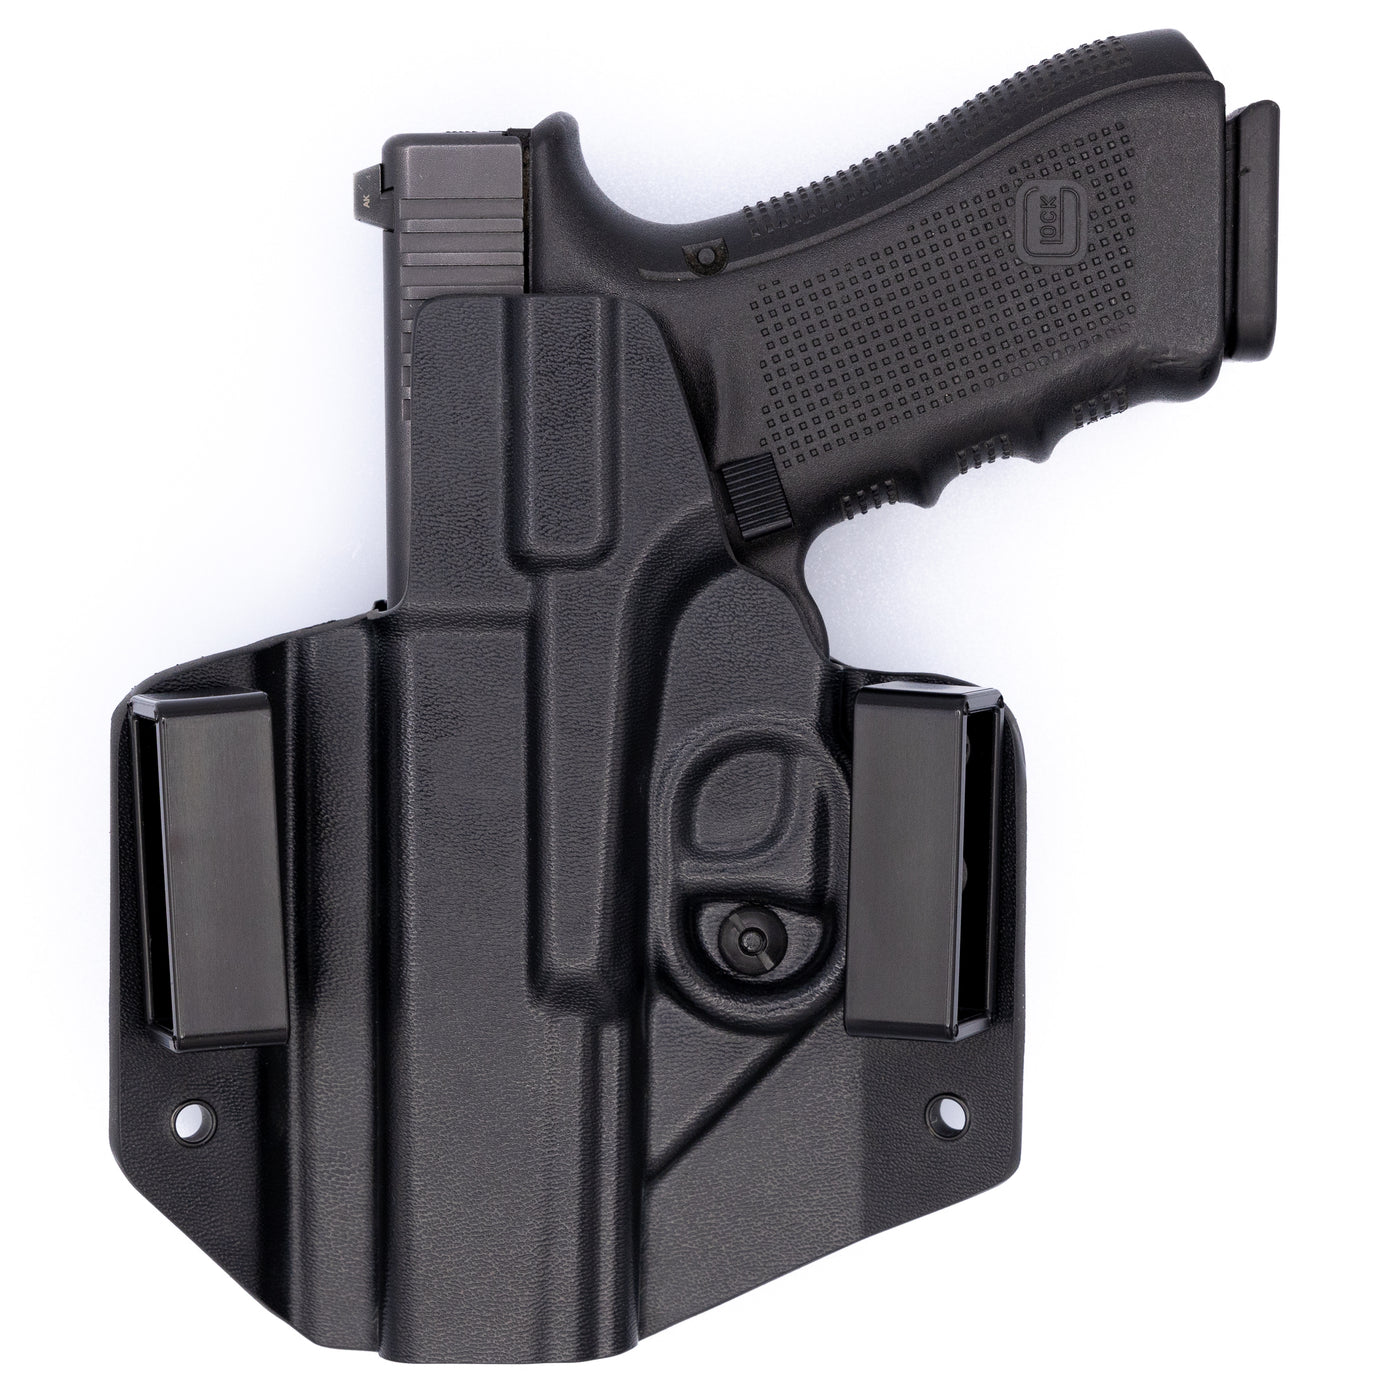 This is the rear of the C&G Holsters outside the waistband Covert series holster for the Glock 19